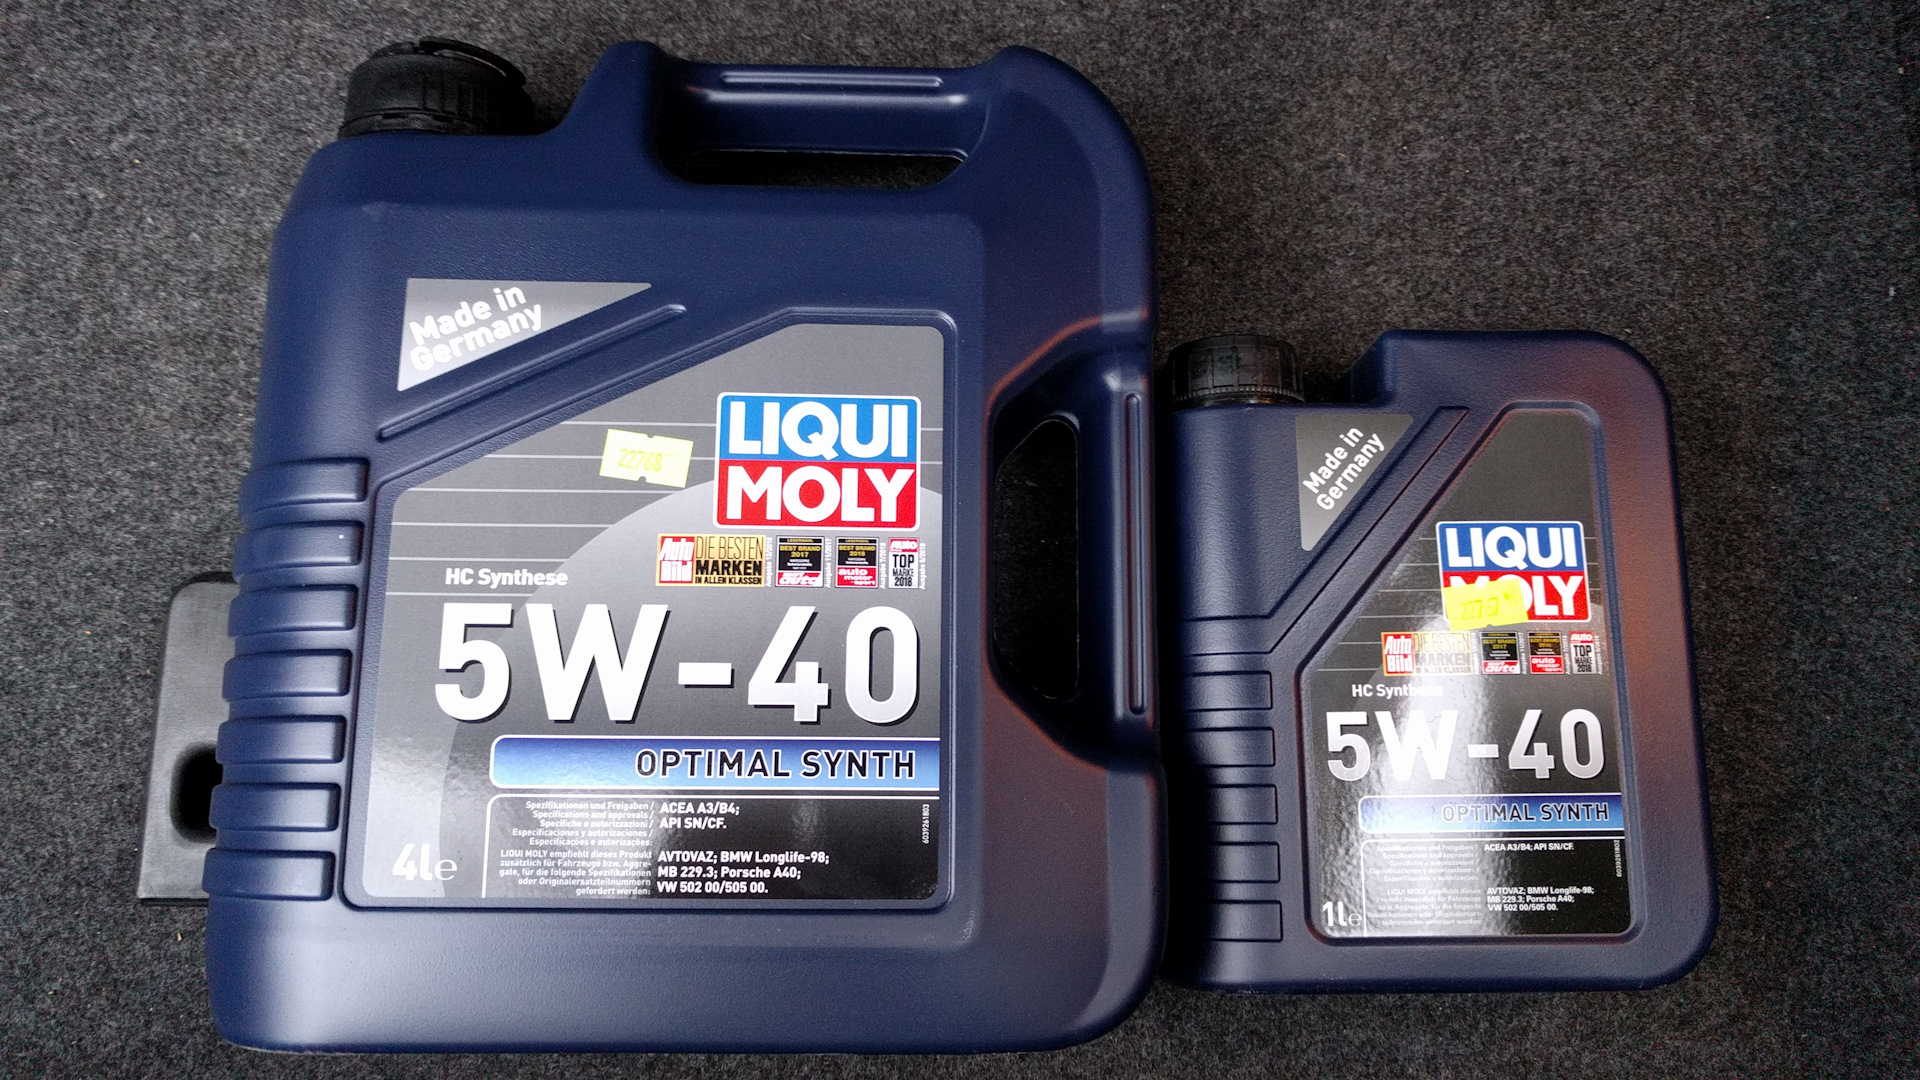 Масло 5w40 synth. Liqui Moly 5w40 OPTIMAL Synth. OPTIMAL Synth 5w-40. LM OPTIMAL Synth 5w40. Масло Liqui Moly 5w-40 OPTIMAL Synth 60l.